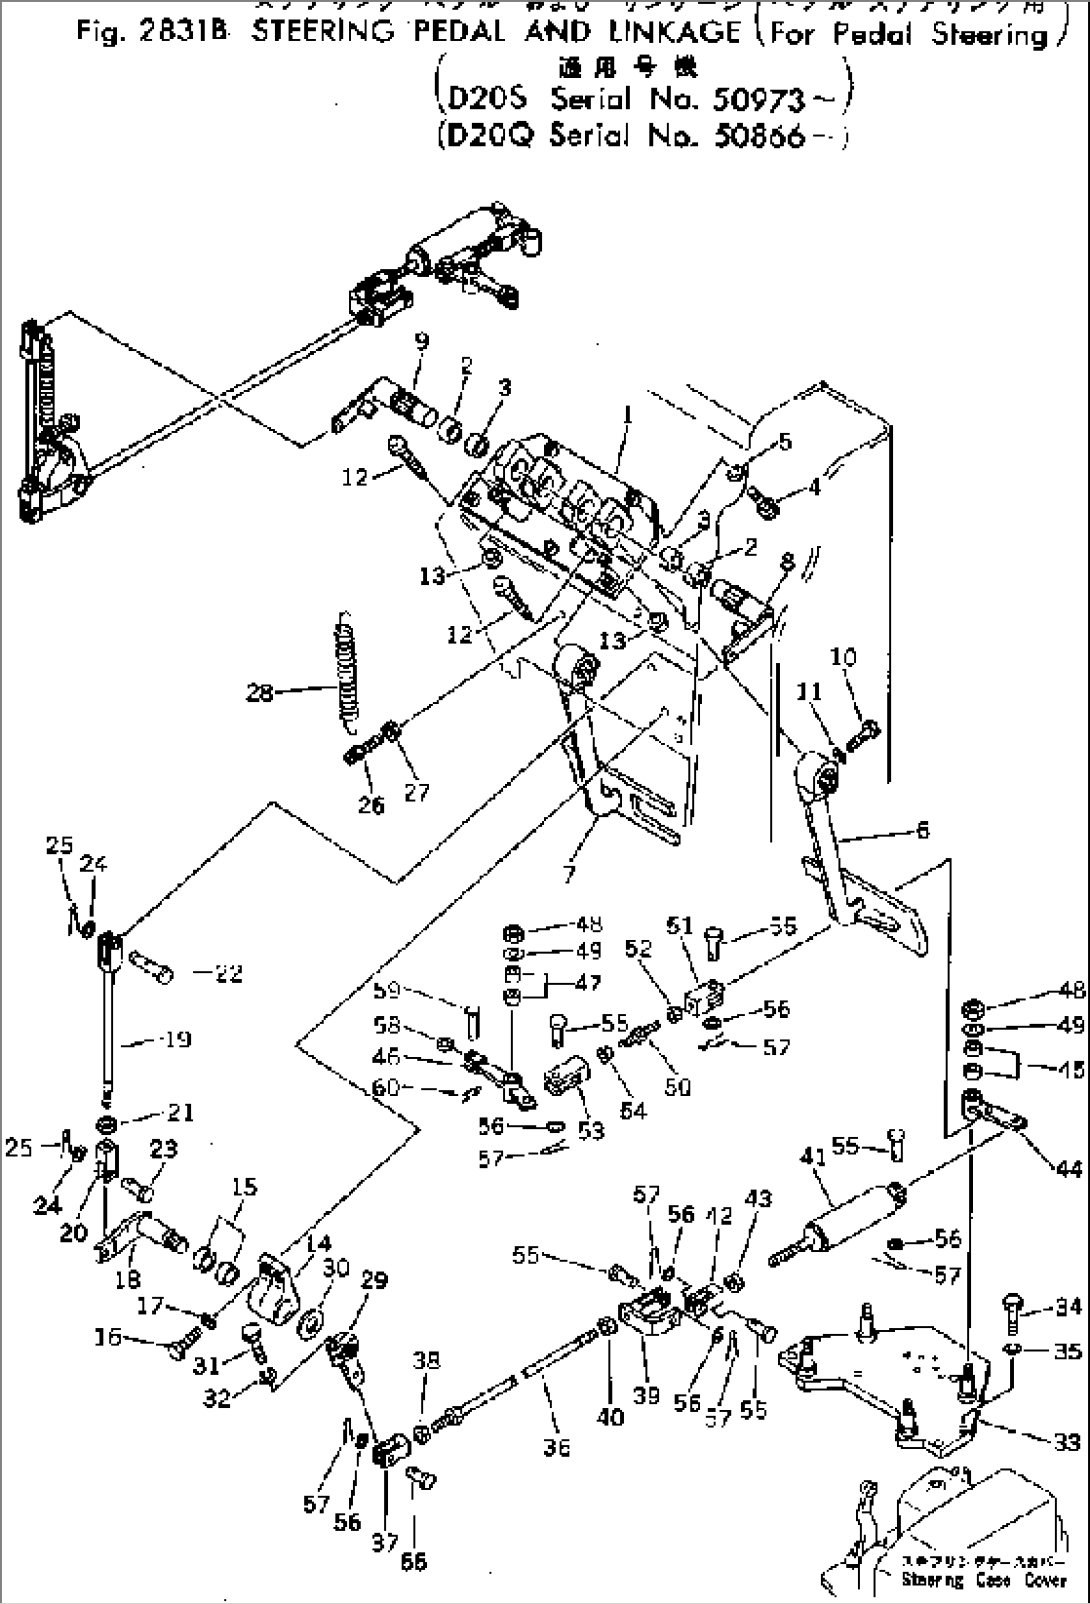 STEERING PEDAL AND LINKAGE (FOR PEDAL STEERING)(#50973-)